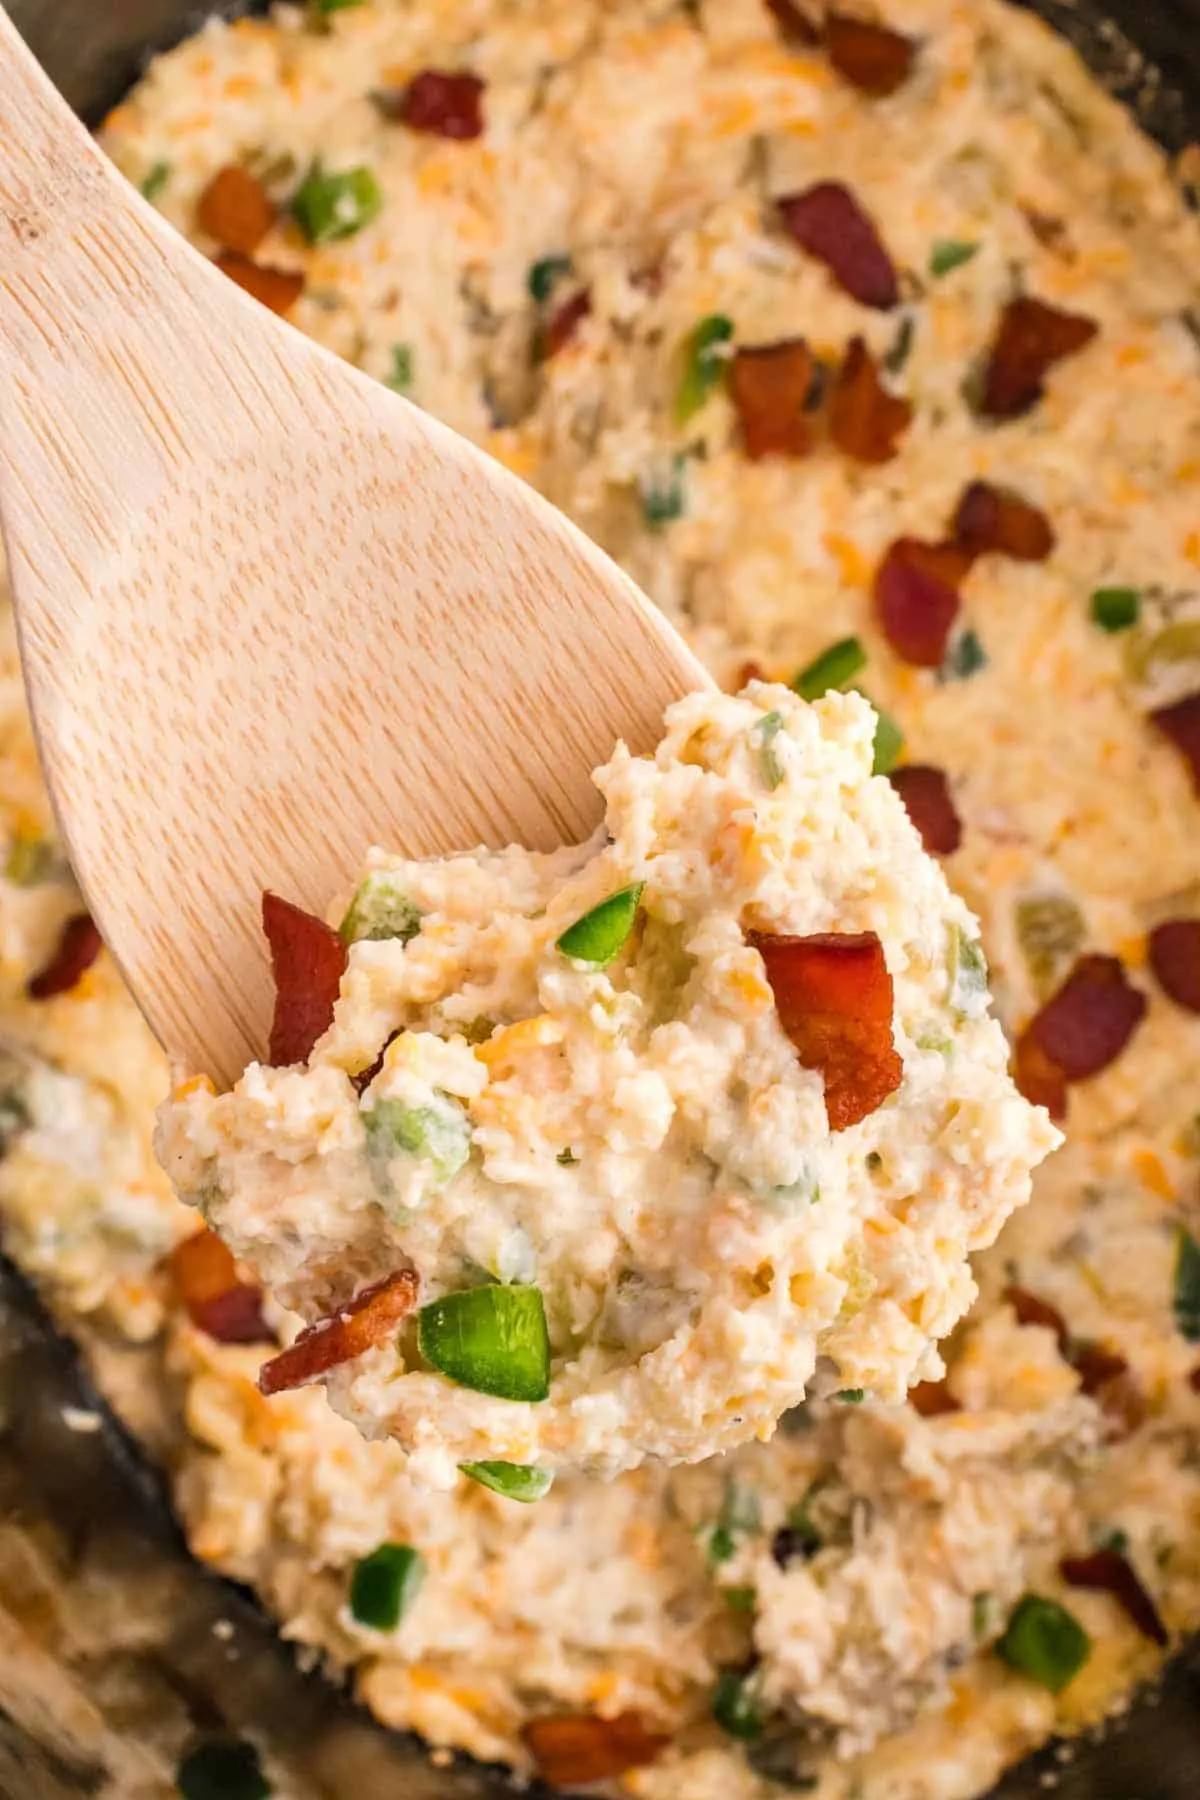 Crock Pot Jalapeno Popper Dip is a delicious hot dip recipe loaded with cream cheese, cheddar, Monterey Jack, mayo, sour cream, jalapenos, green chilies, parmesan, panko bread crumbs and bacon.